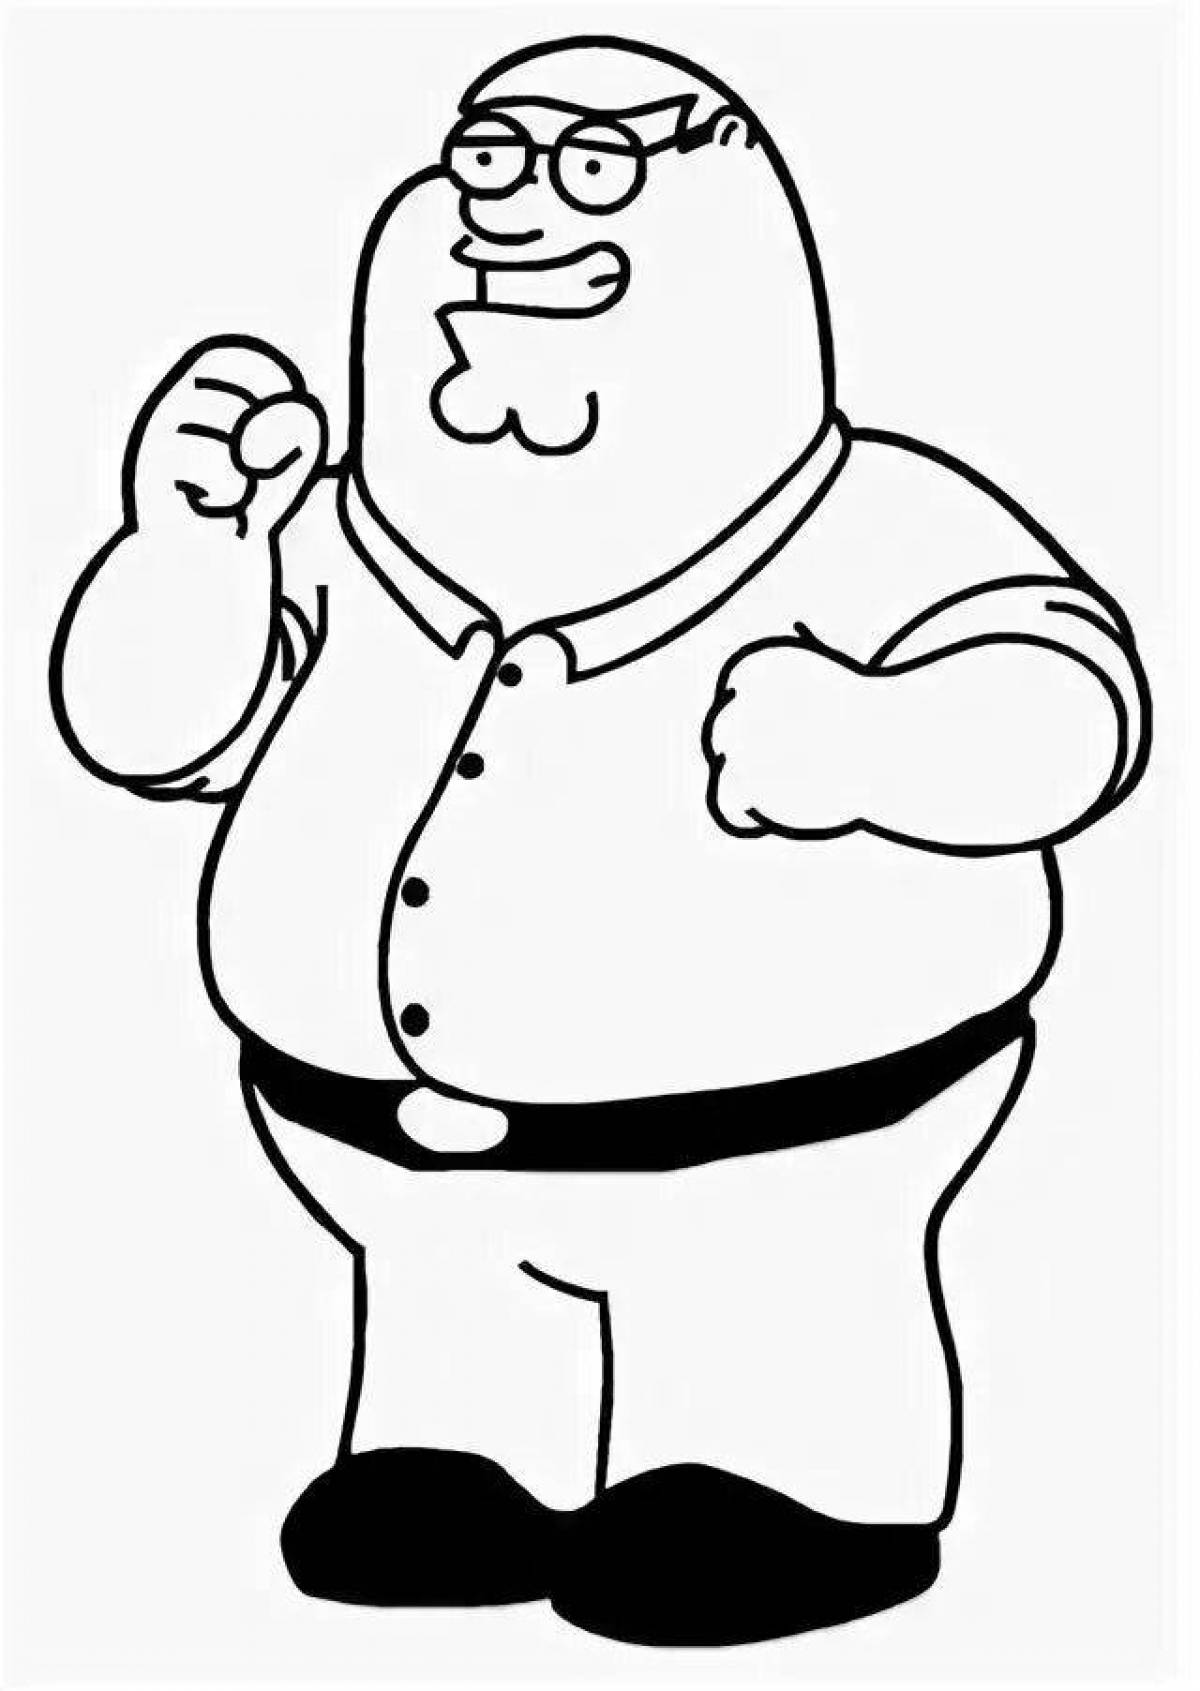 Joyful peter griffin coloring page